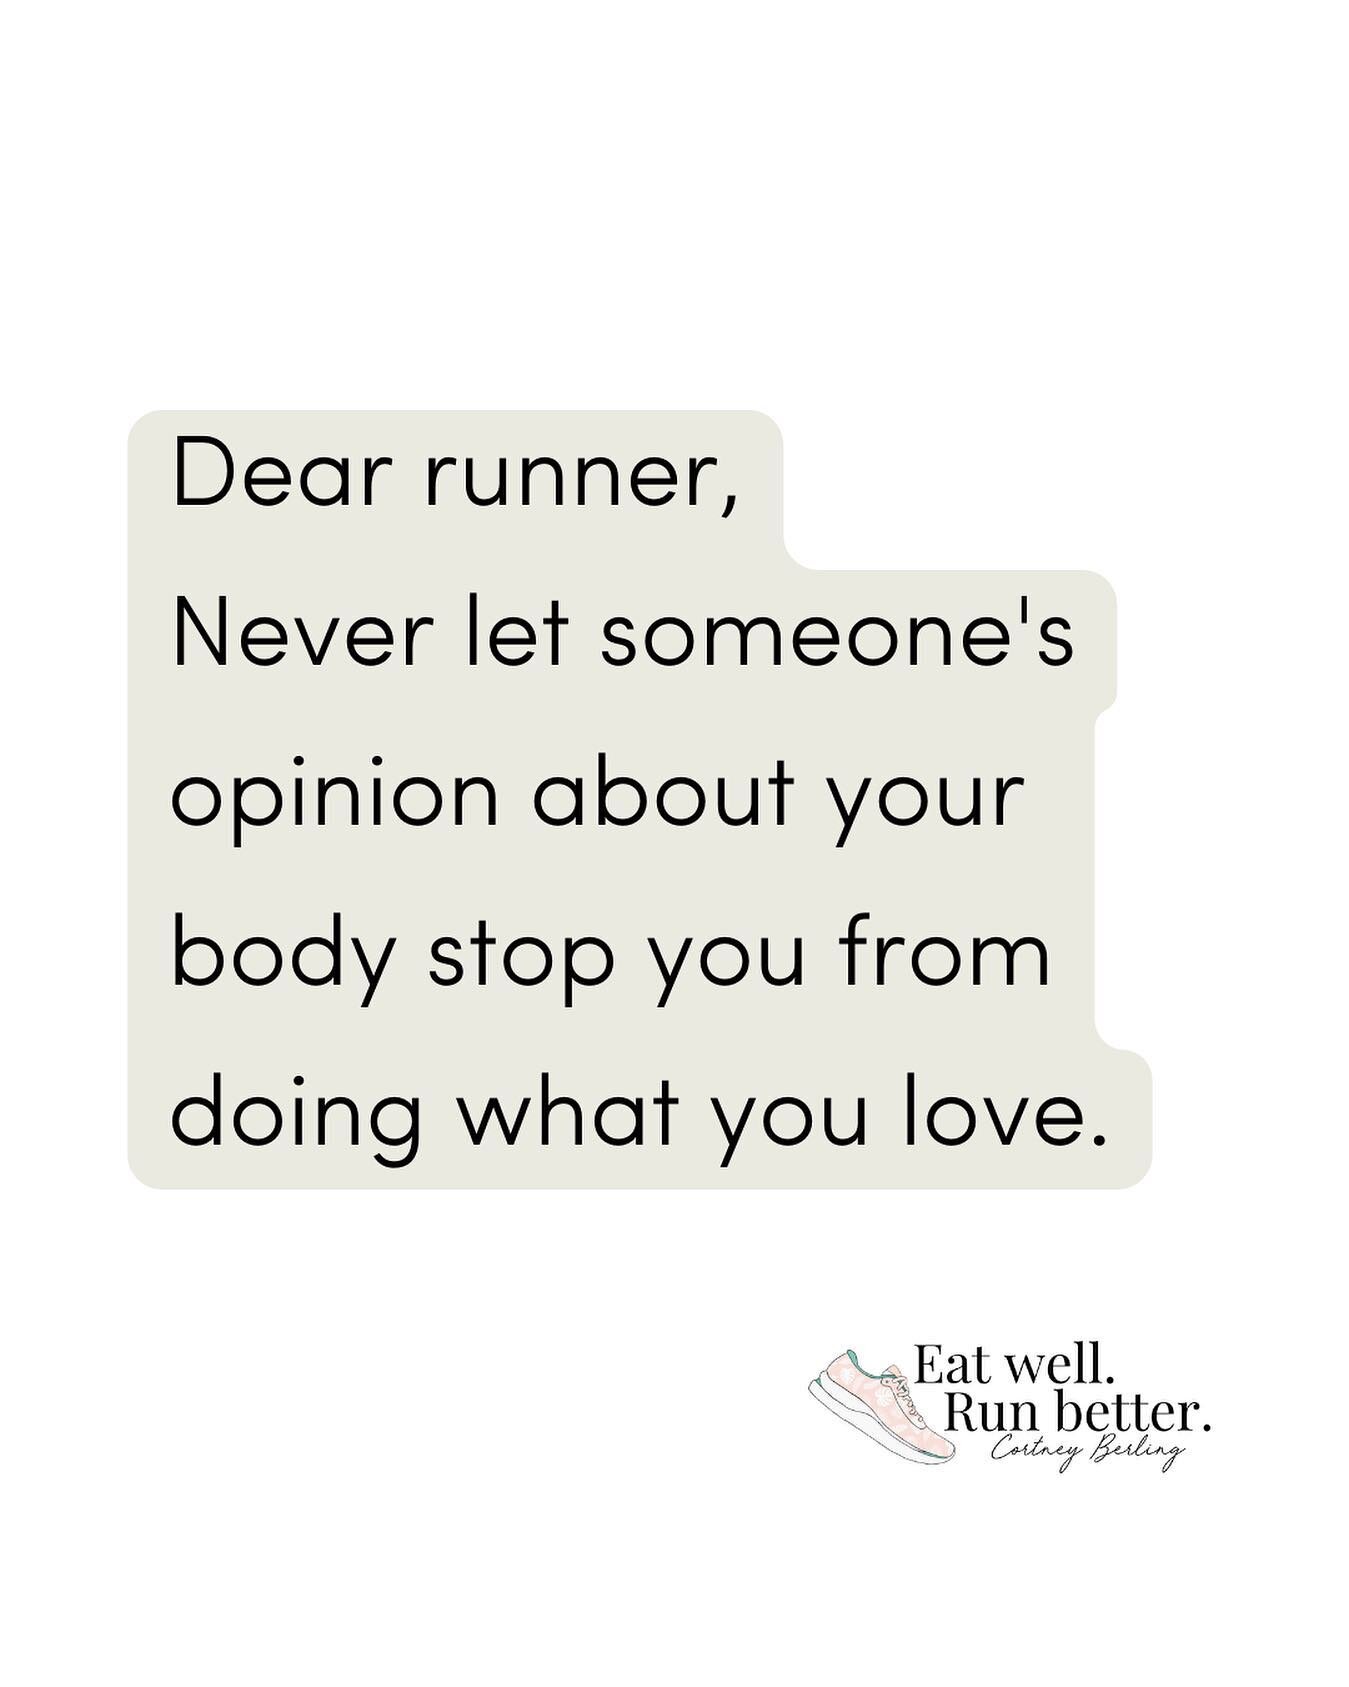 Are you ready to stop letting your body shape/size dictate what you allow yourself to do? Let me know in the comments 👇👇

🏃&zwj;♀️Runner, I know you see those runners on TikTok or Instagram and immediately feel a sense of inadequacy because your b